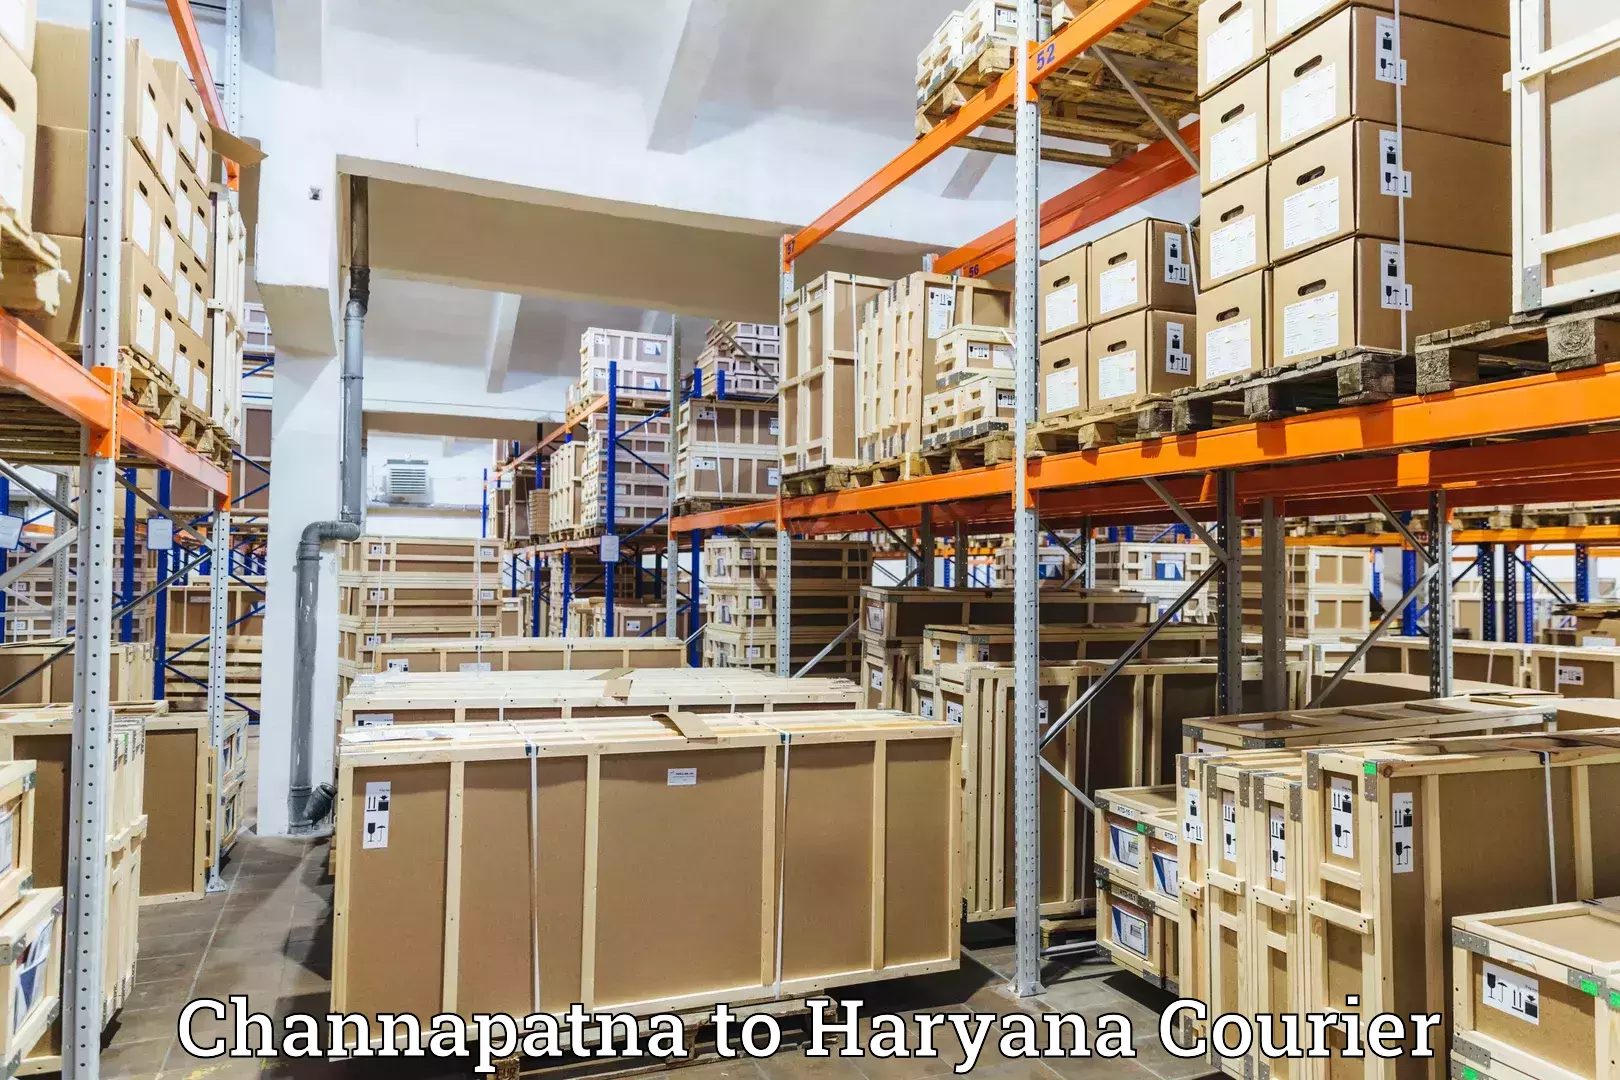 Subscription-based courier Channapatna to Haryana